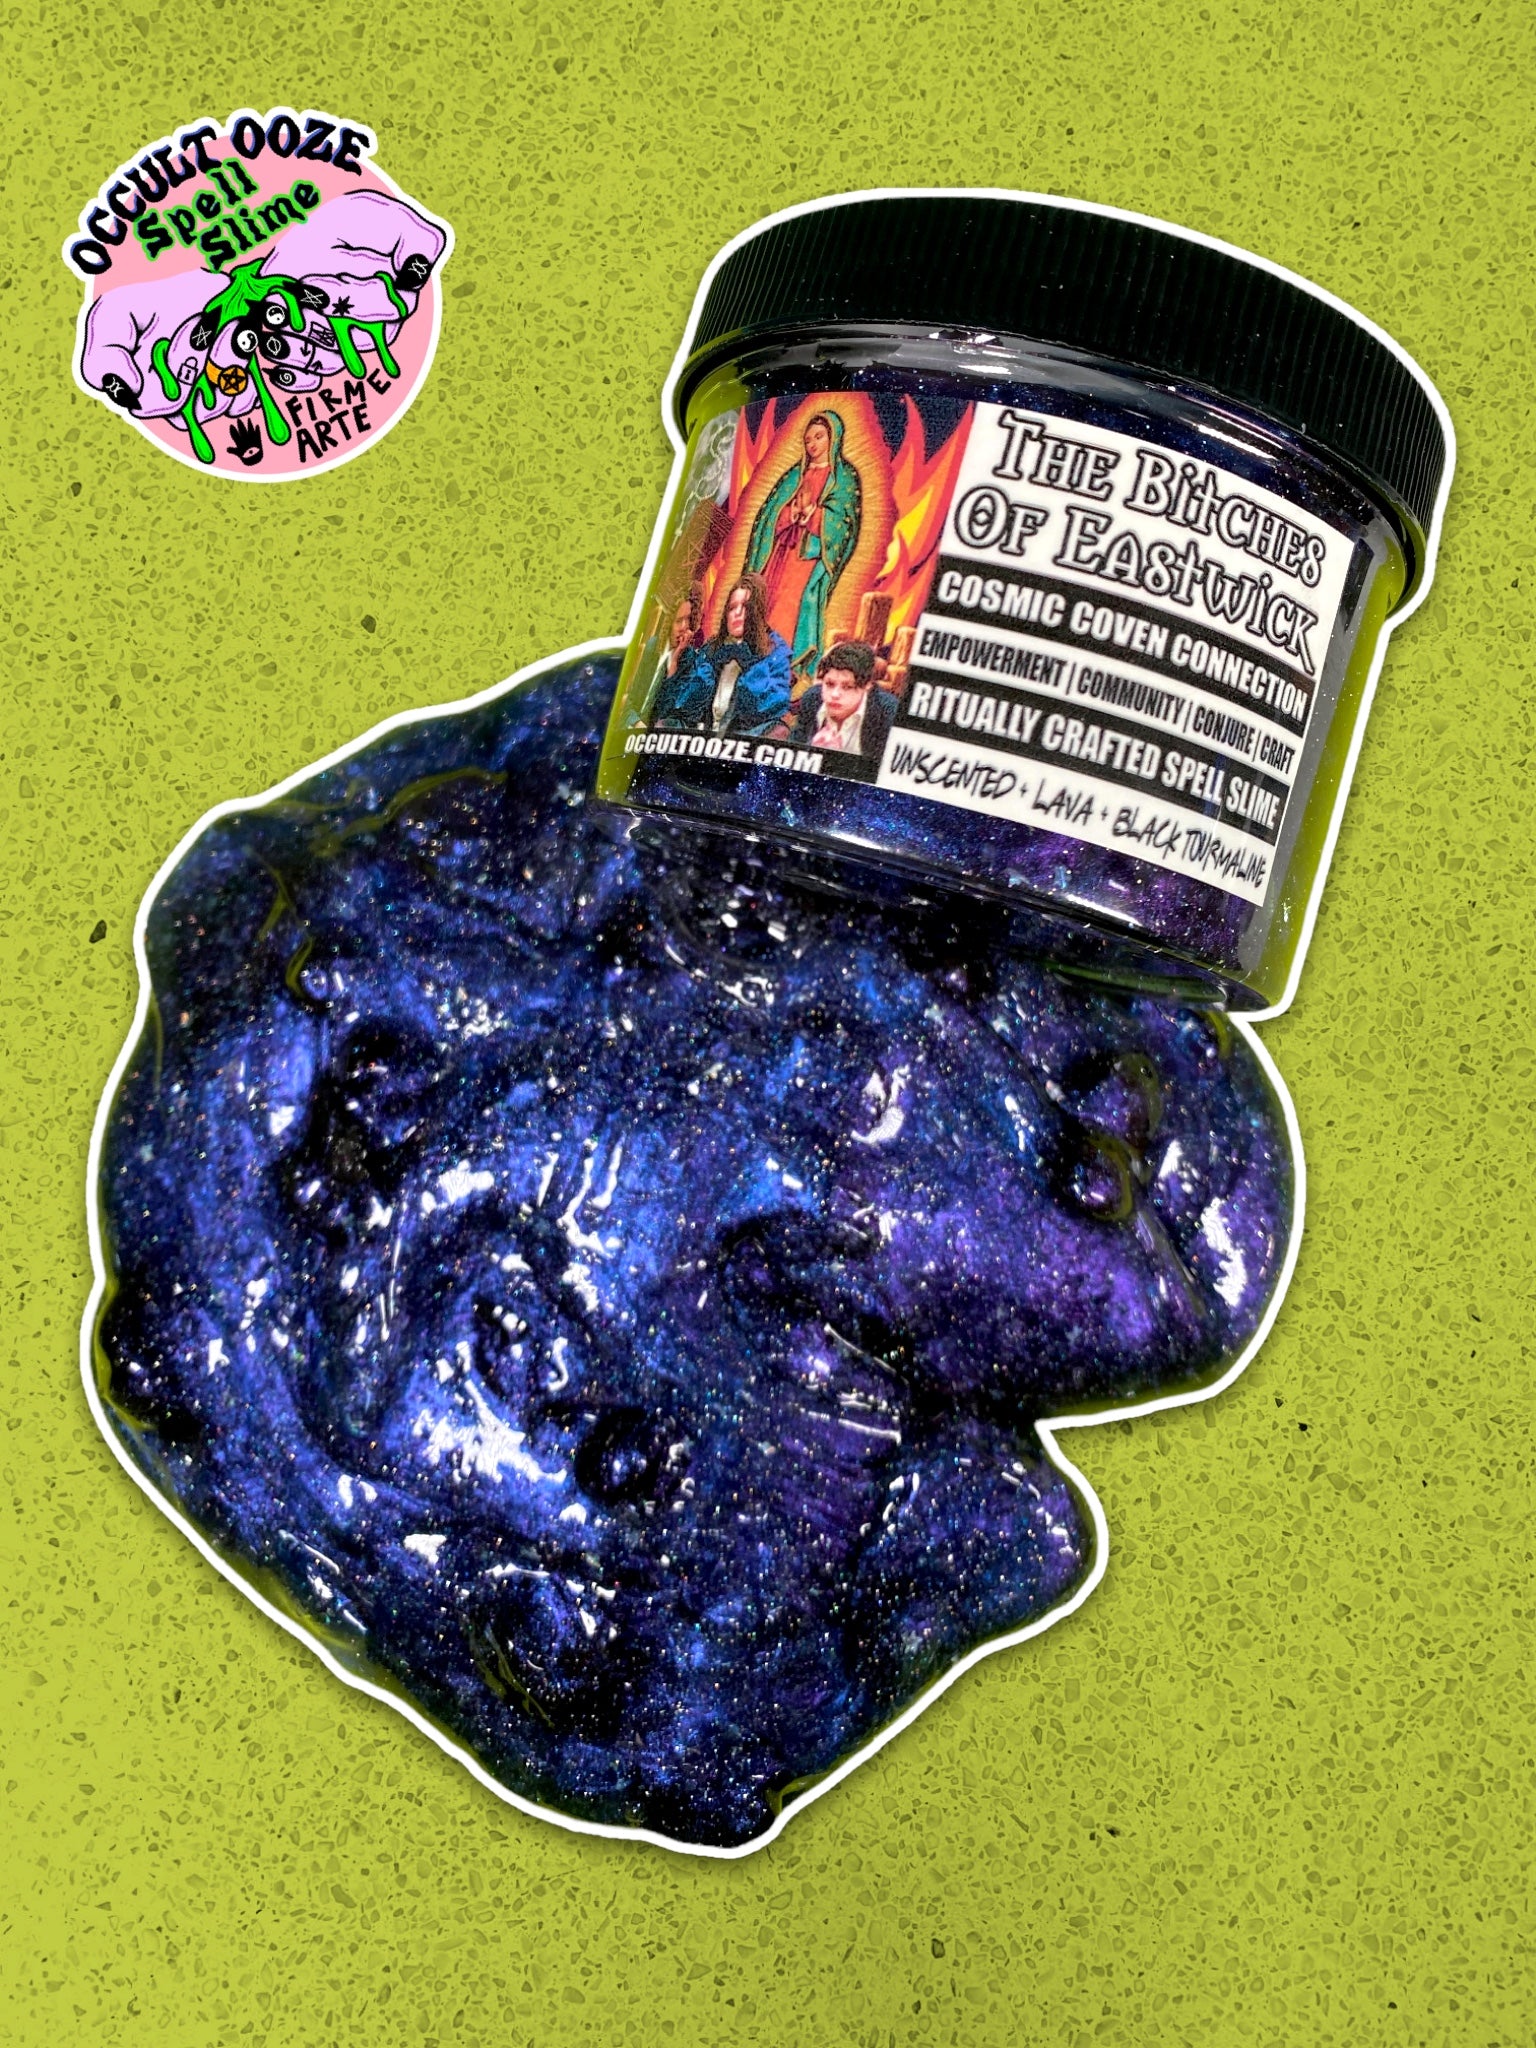 Occult Ooze | Spell Slime | The Bitches Of Eastwick | Cosmic Coven Connection